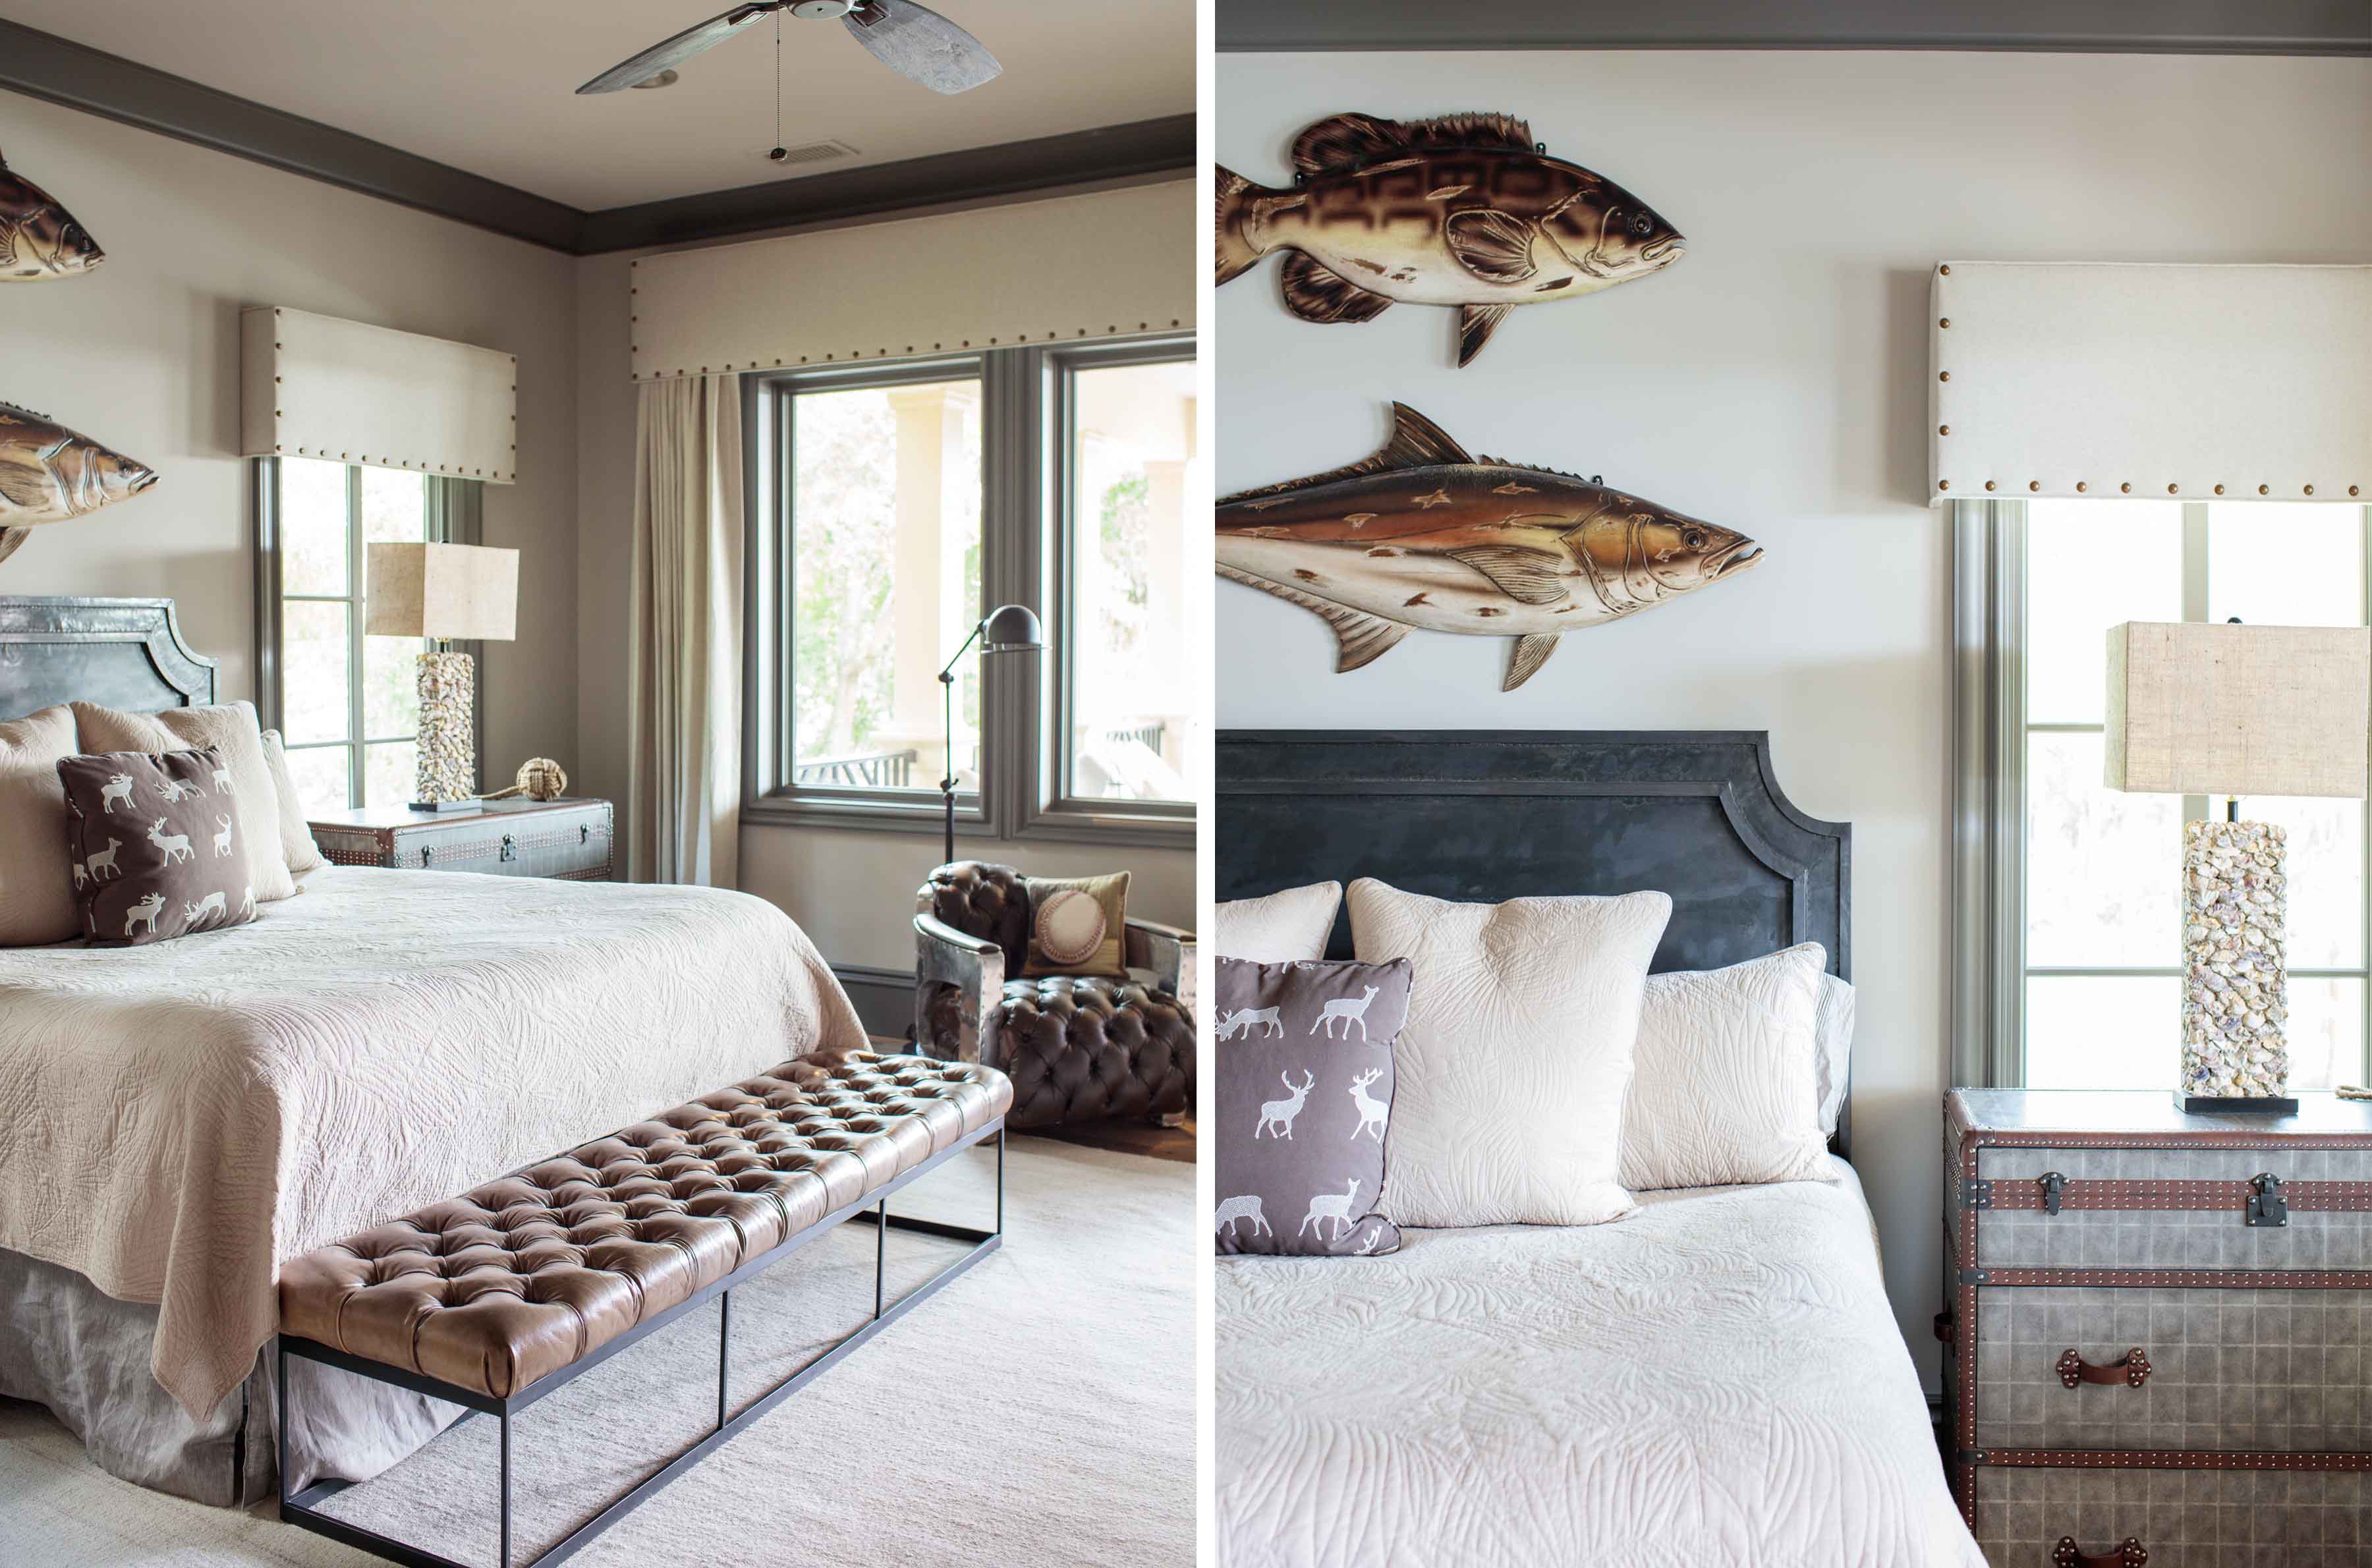 lowcountry bedroom design by Sharon Cleland of the J Banks Design Group includes hints of the nature beyond the windows